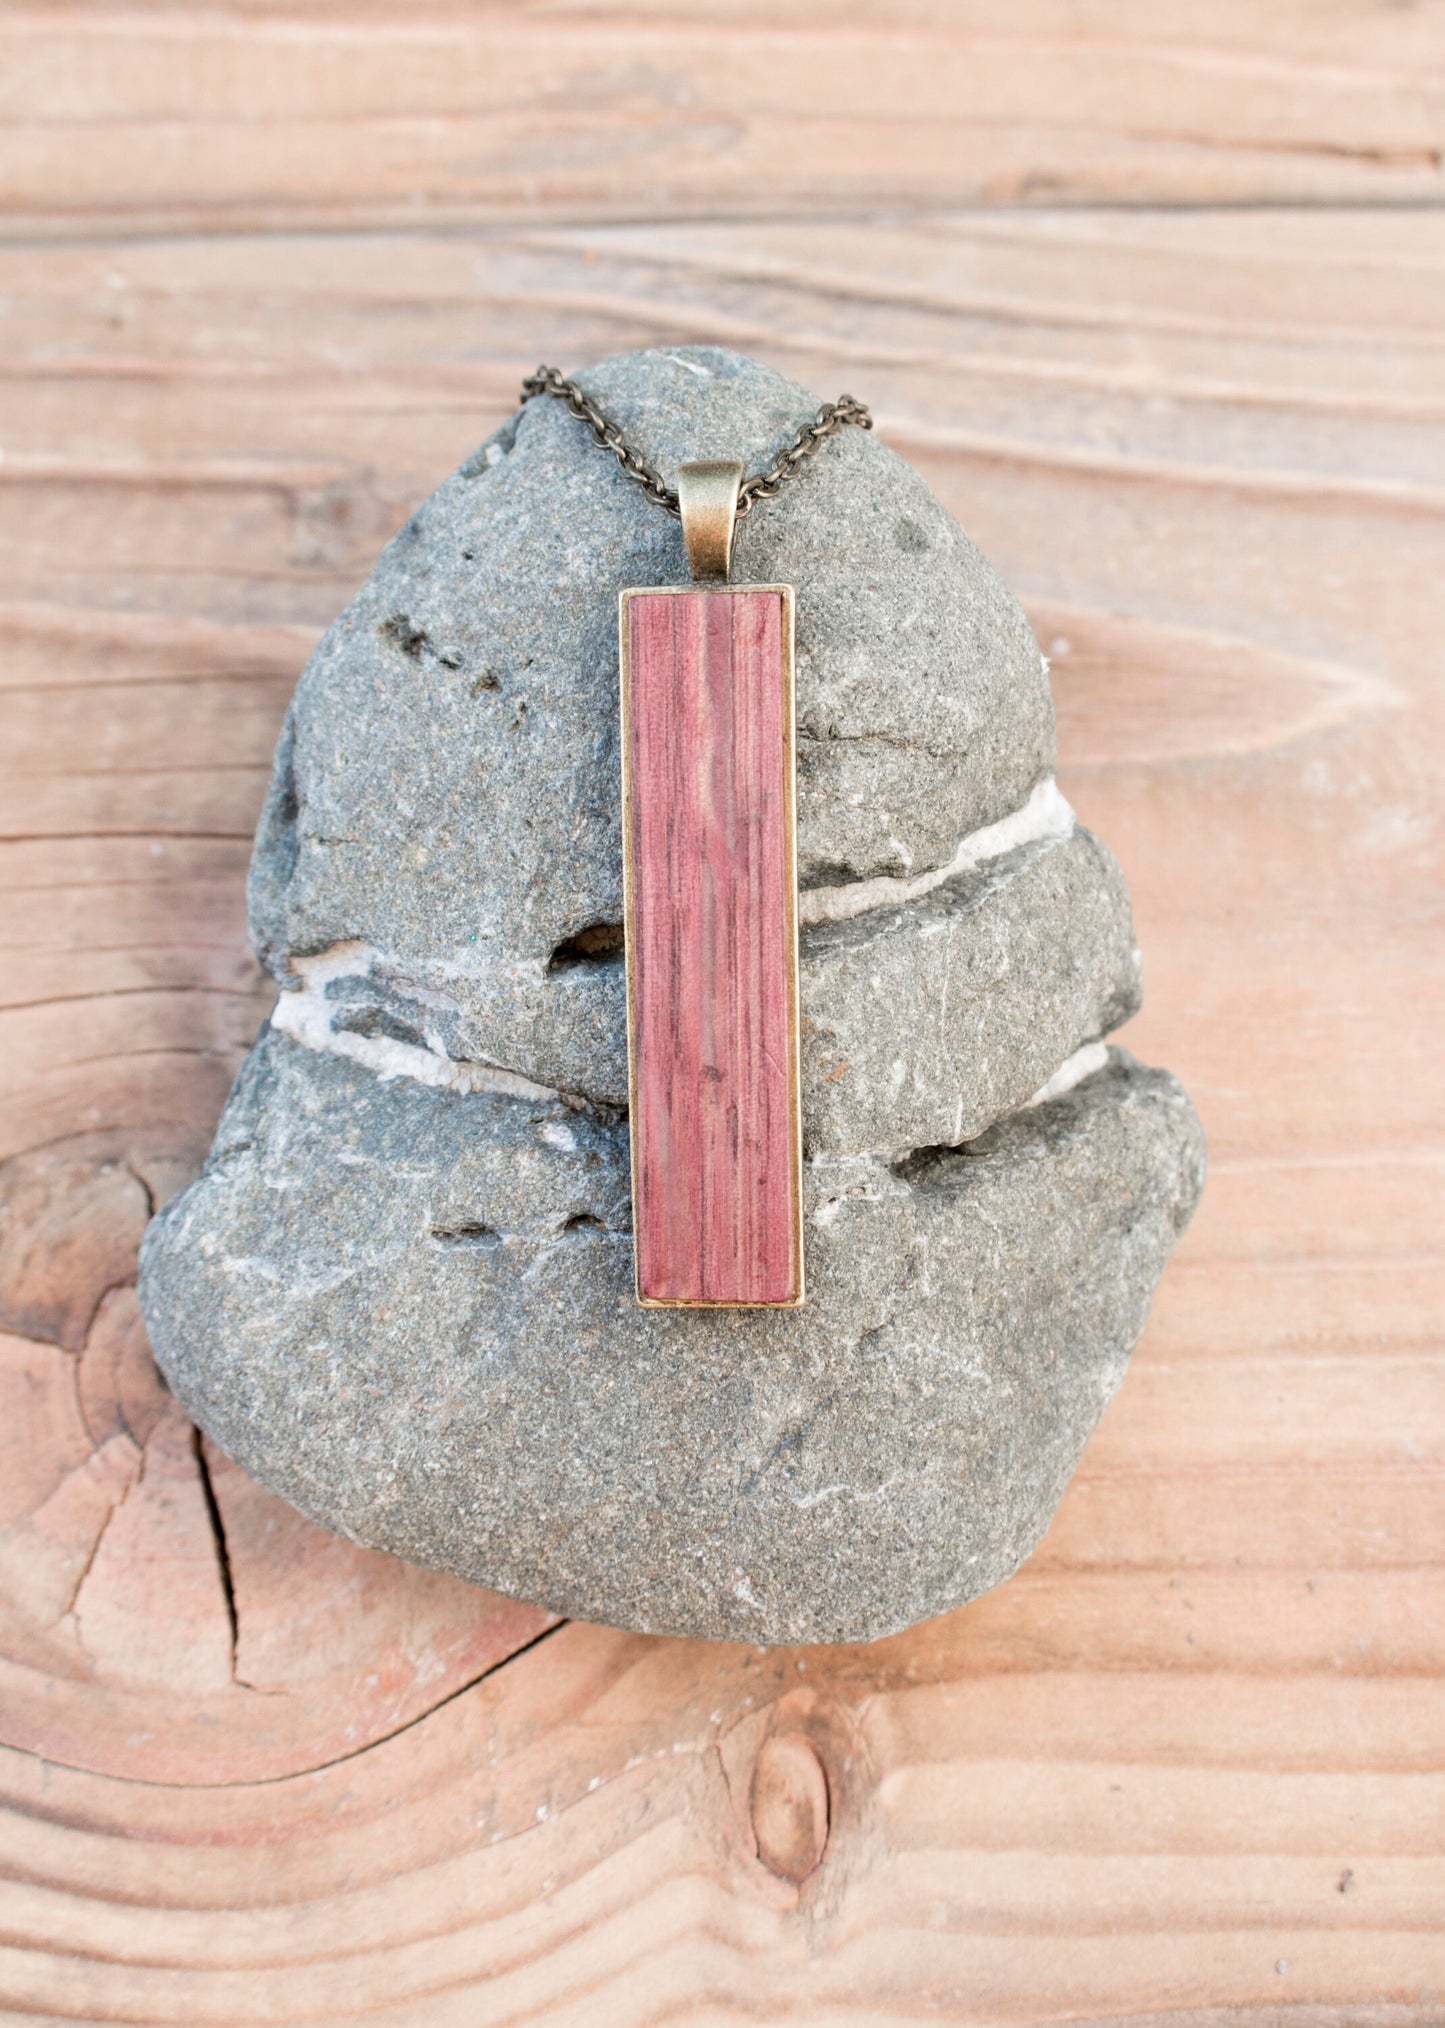 Wine Barrel Pendant - Til Next Time - Made from retired Napa Cabernet California wine barrels. 100% Recycled!